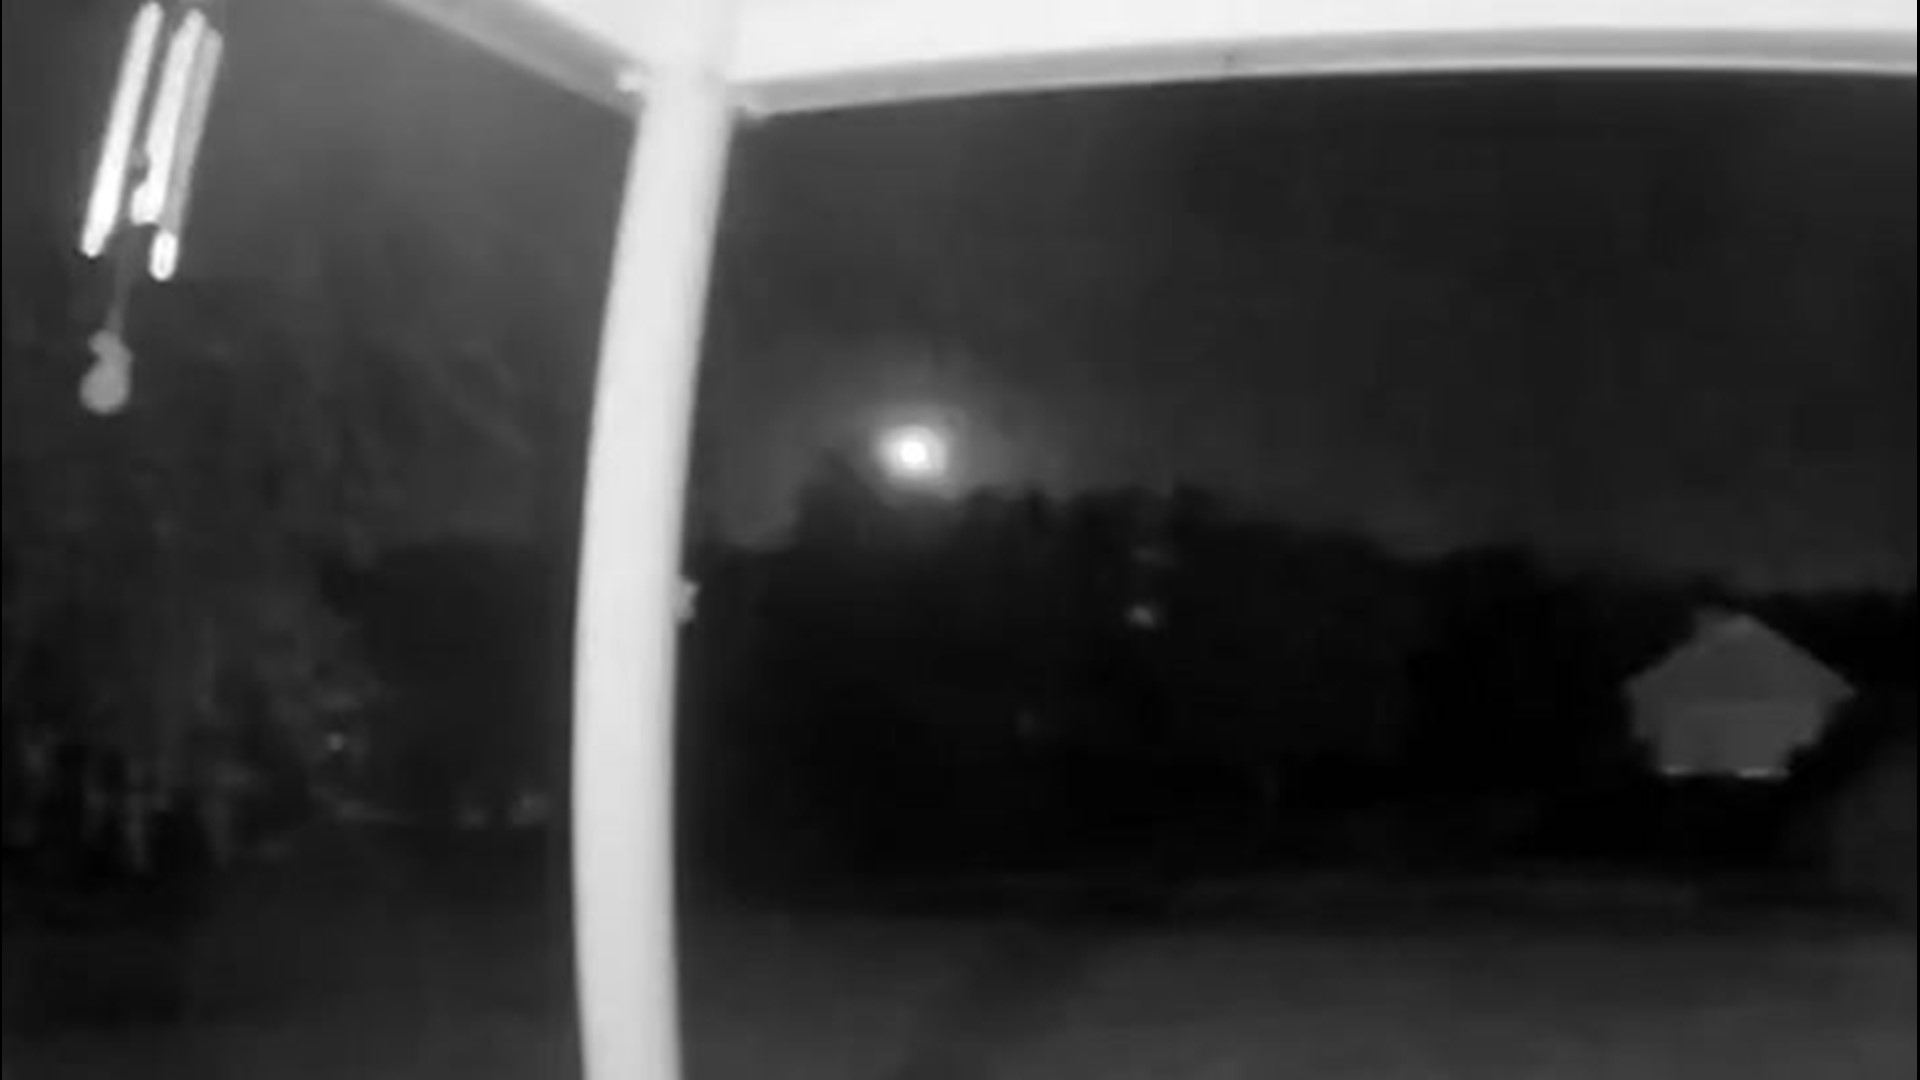 A bright fireball streaked across the early morning sky above London, Kentucky, on Sept. 30. It was caught on video by this home security camera.